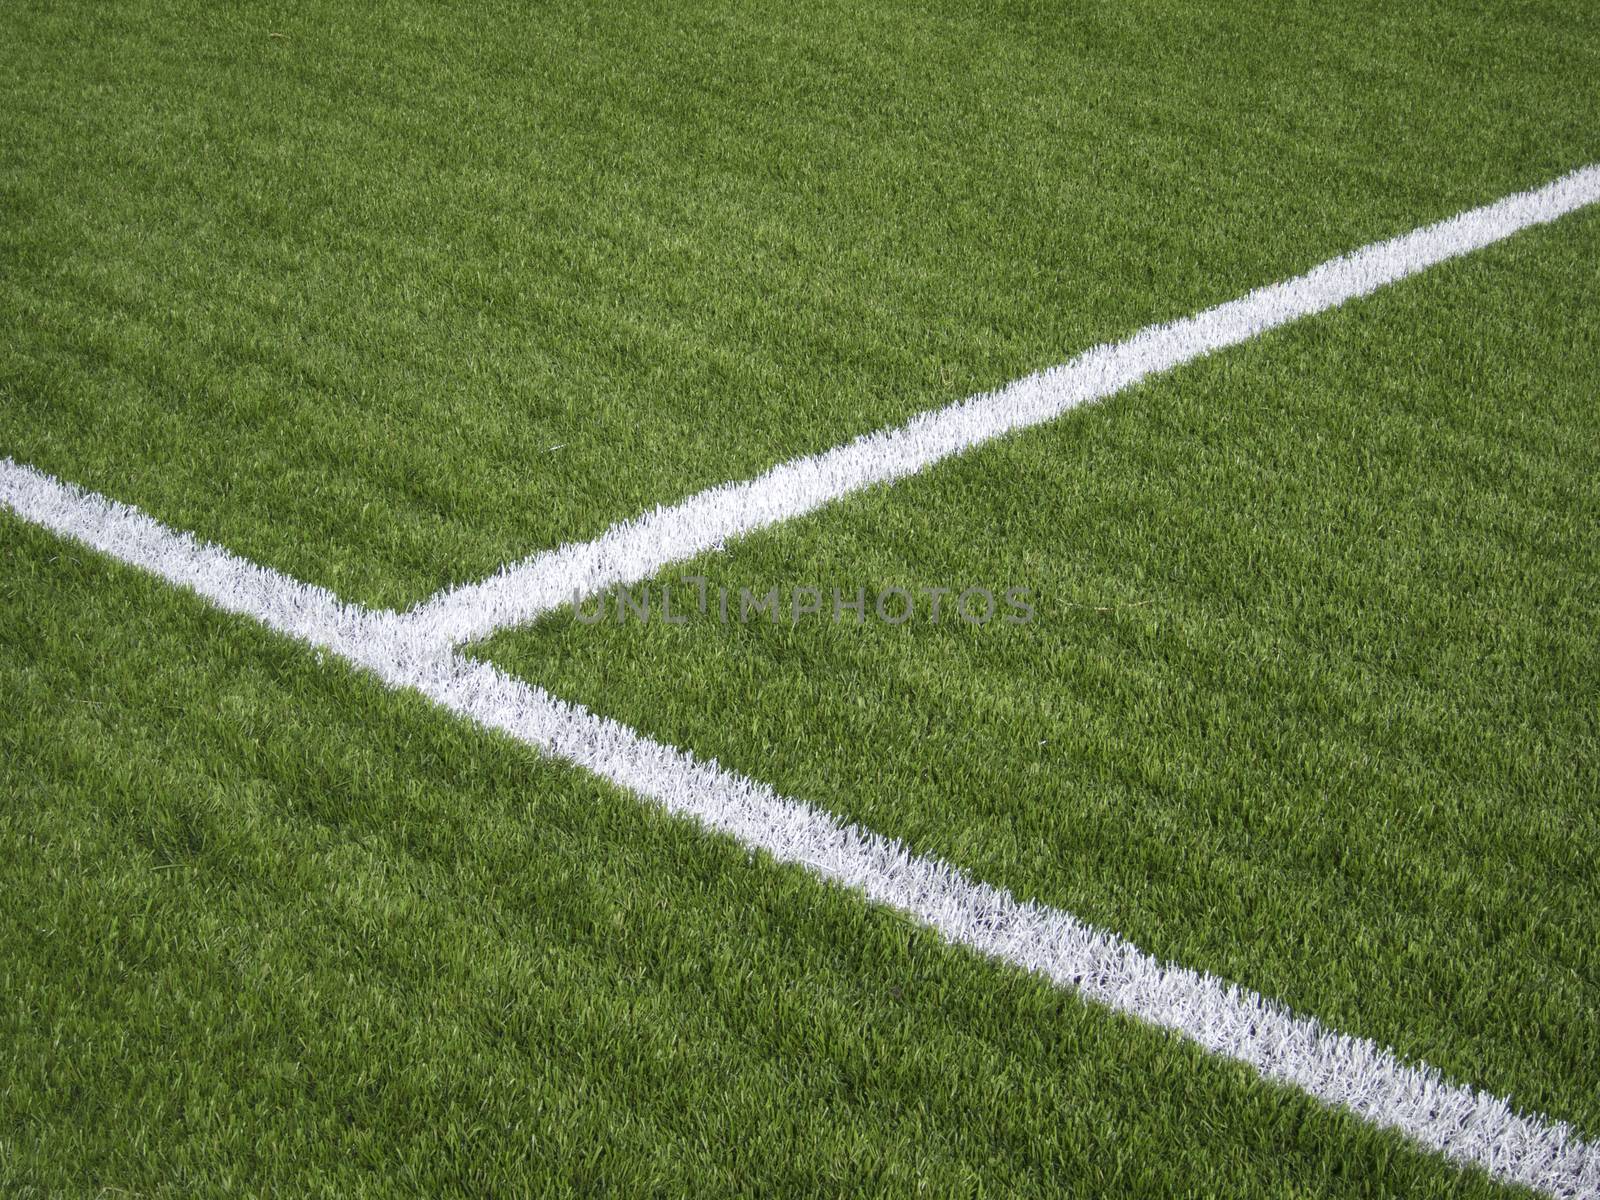 Soccer Field's Lines by demachy